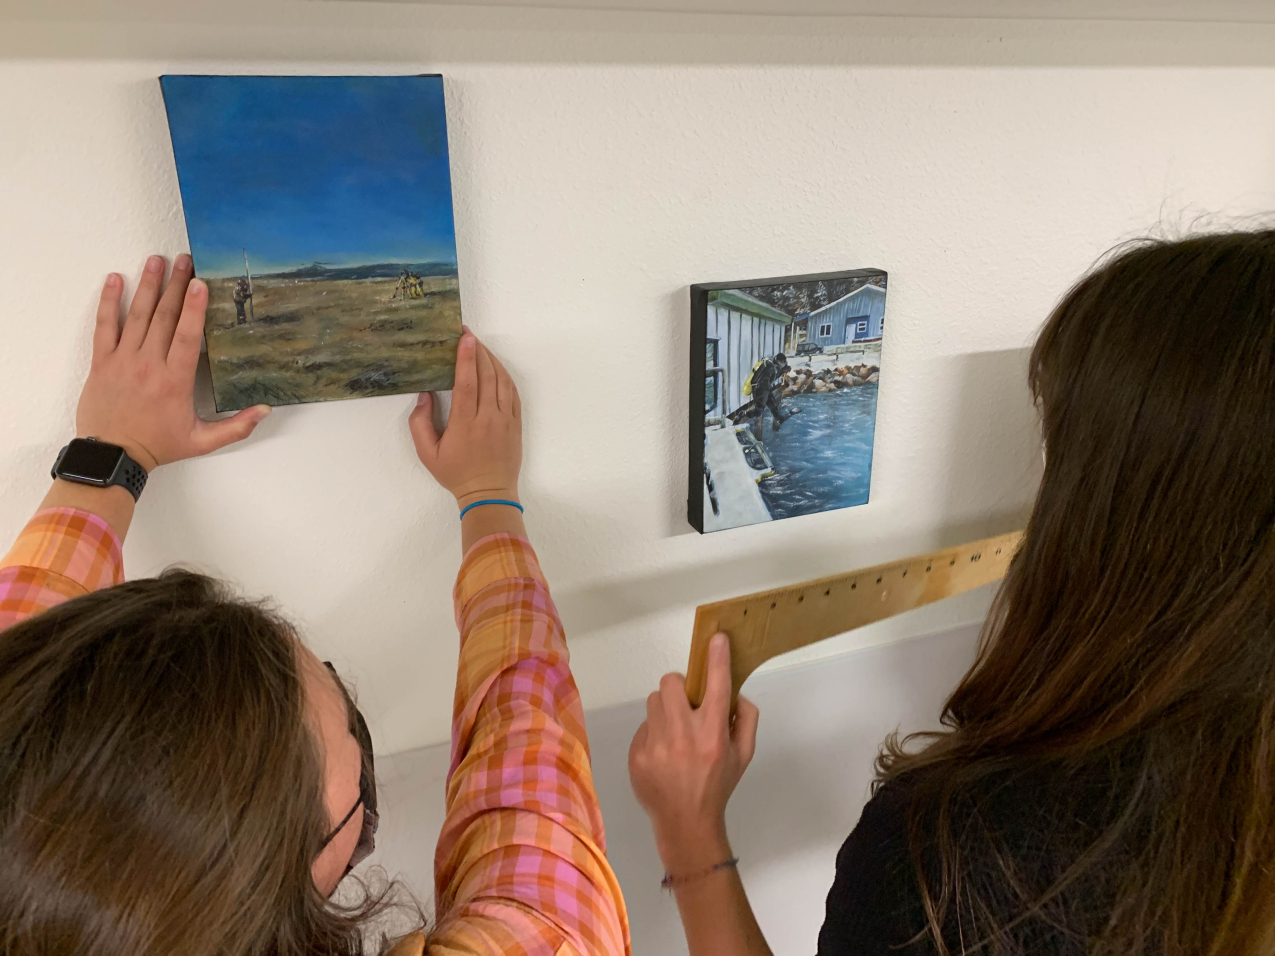 Kate holds a ruler as her sister places a painting. The left painting shows someone holding a pole that extends several feet above them while another person looks through a surveying tripod in a coastal area. The second painting shows a scuba diver mid-jump from a boat docked near the shore.